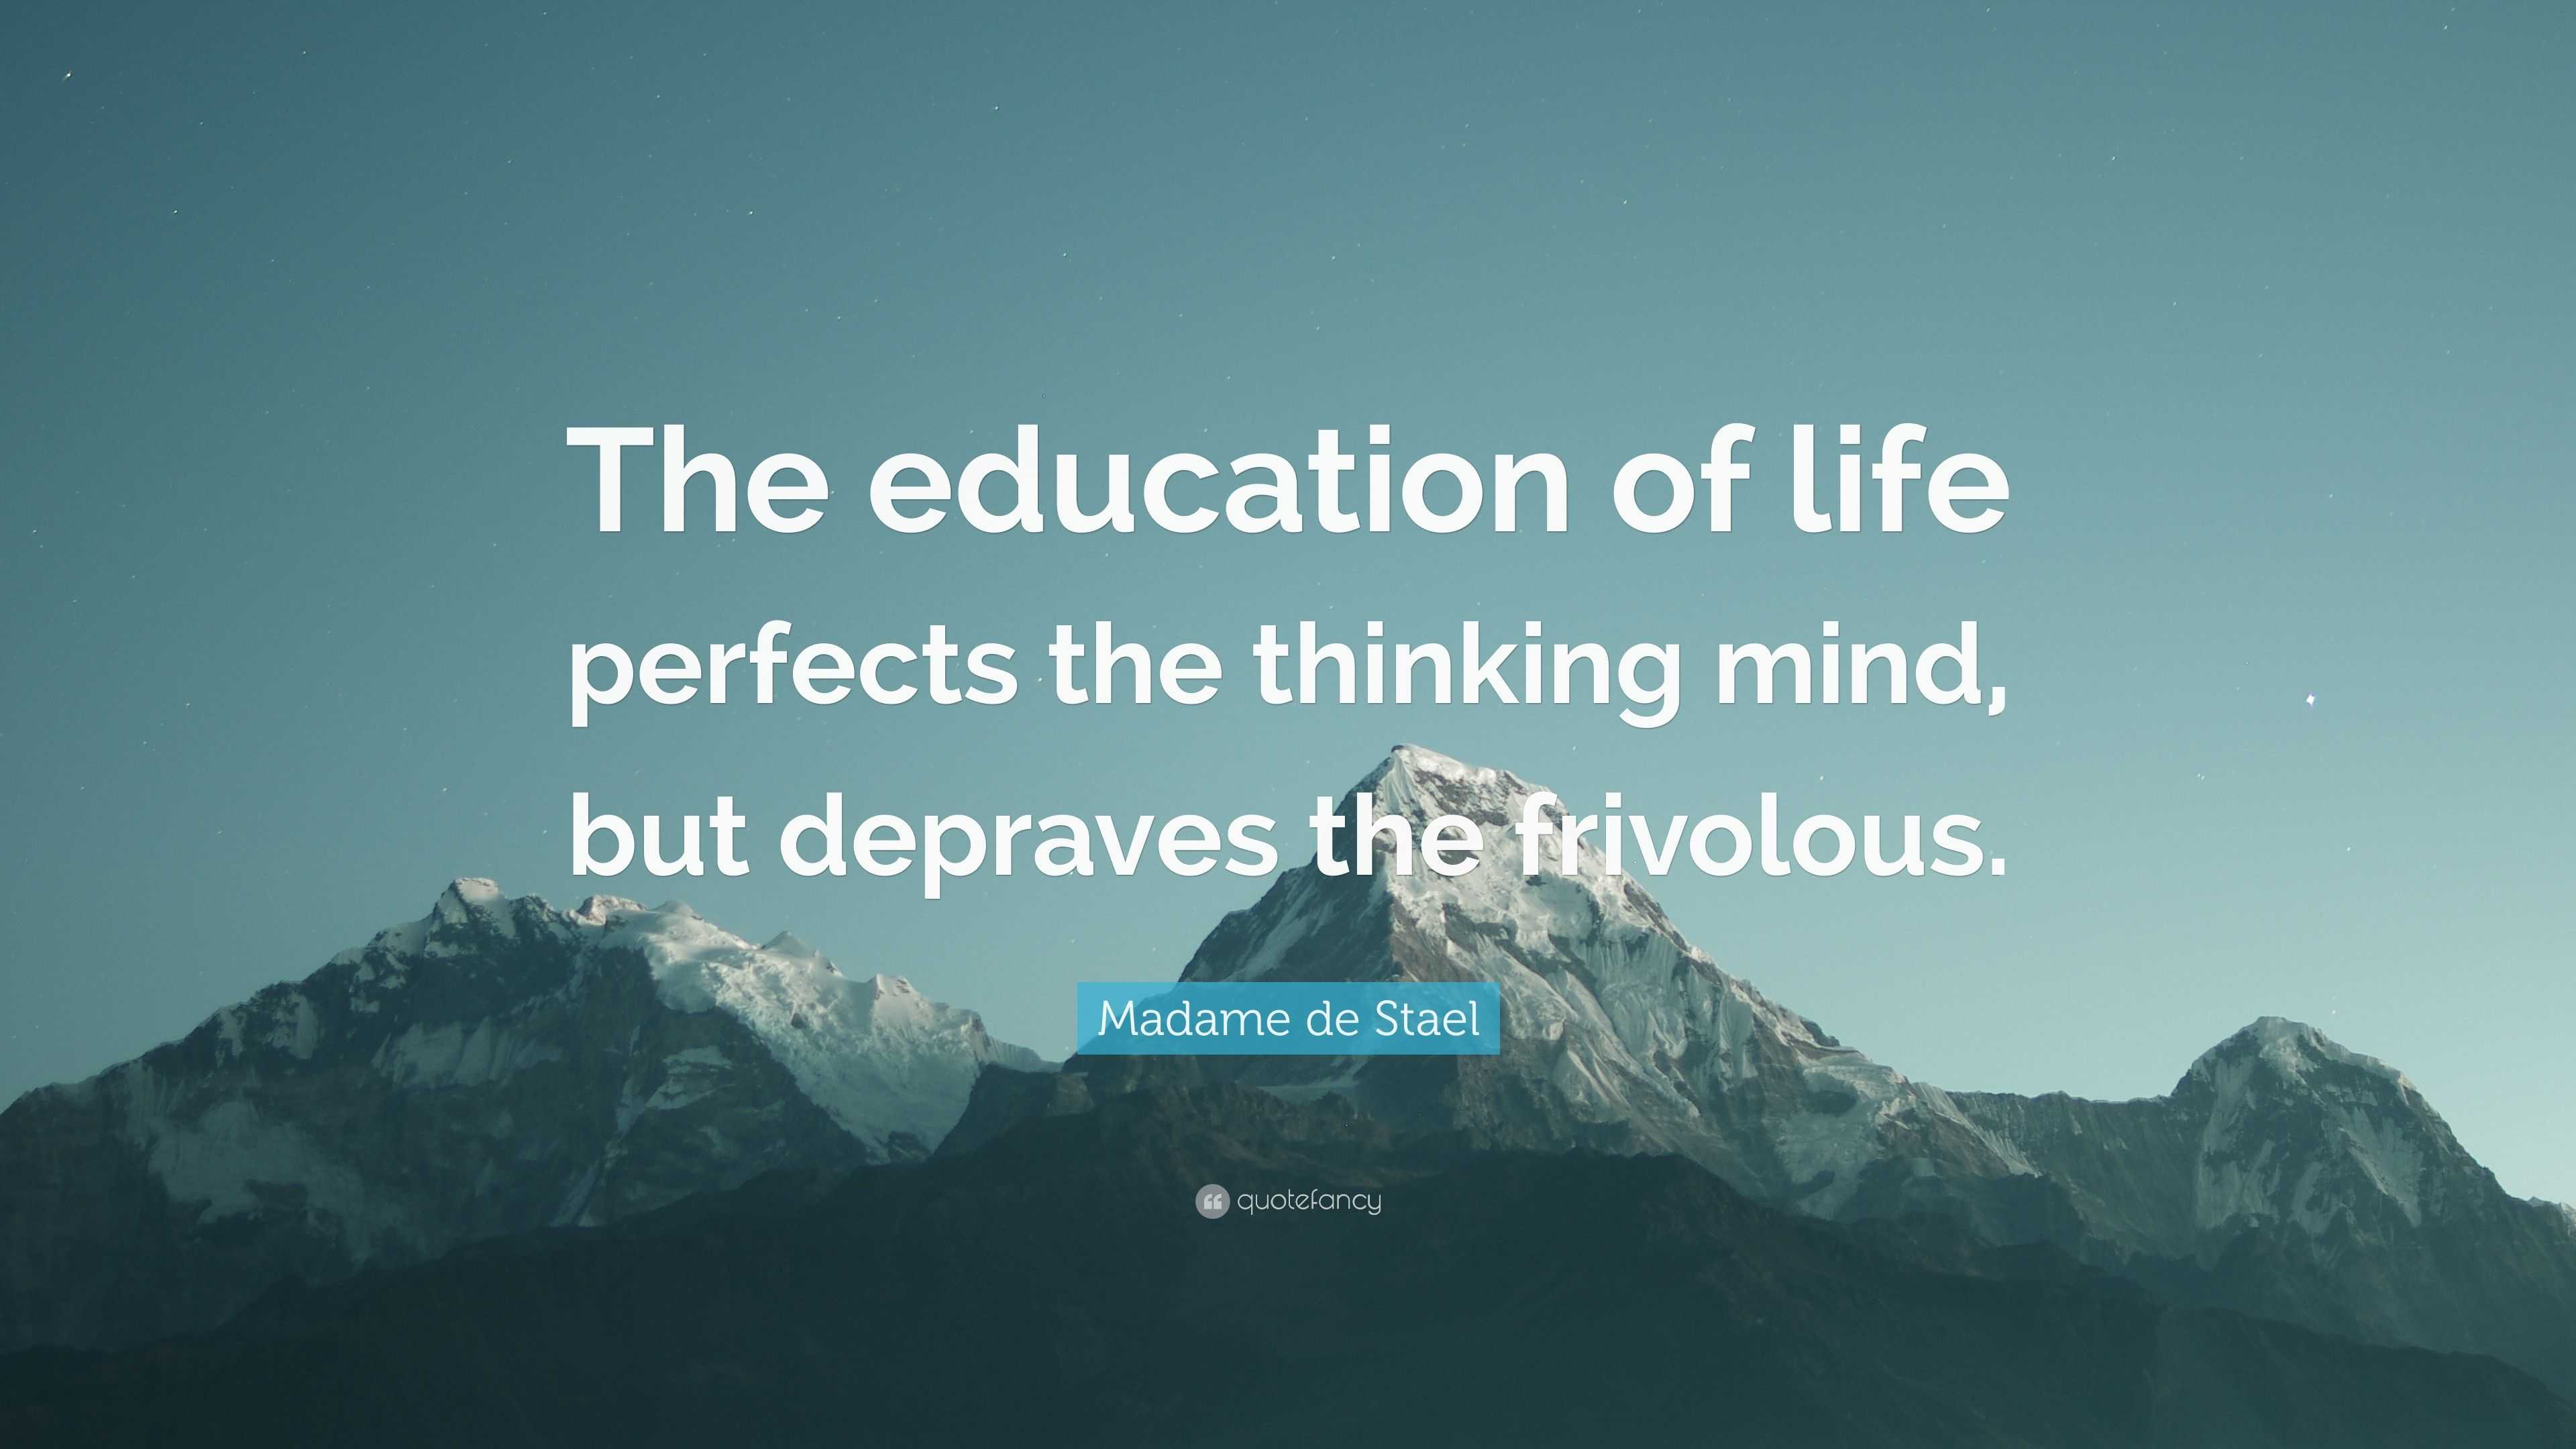 Madame de Stael Quote: “The education of life perfects the thinking ...